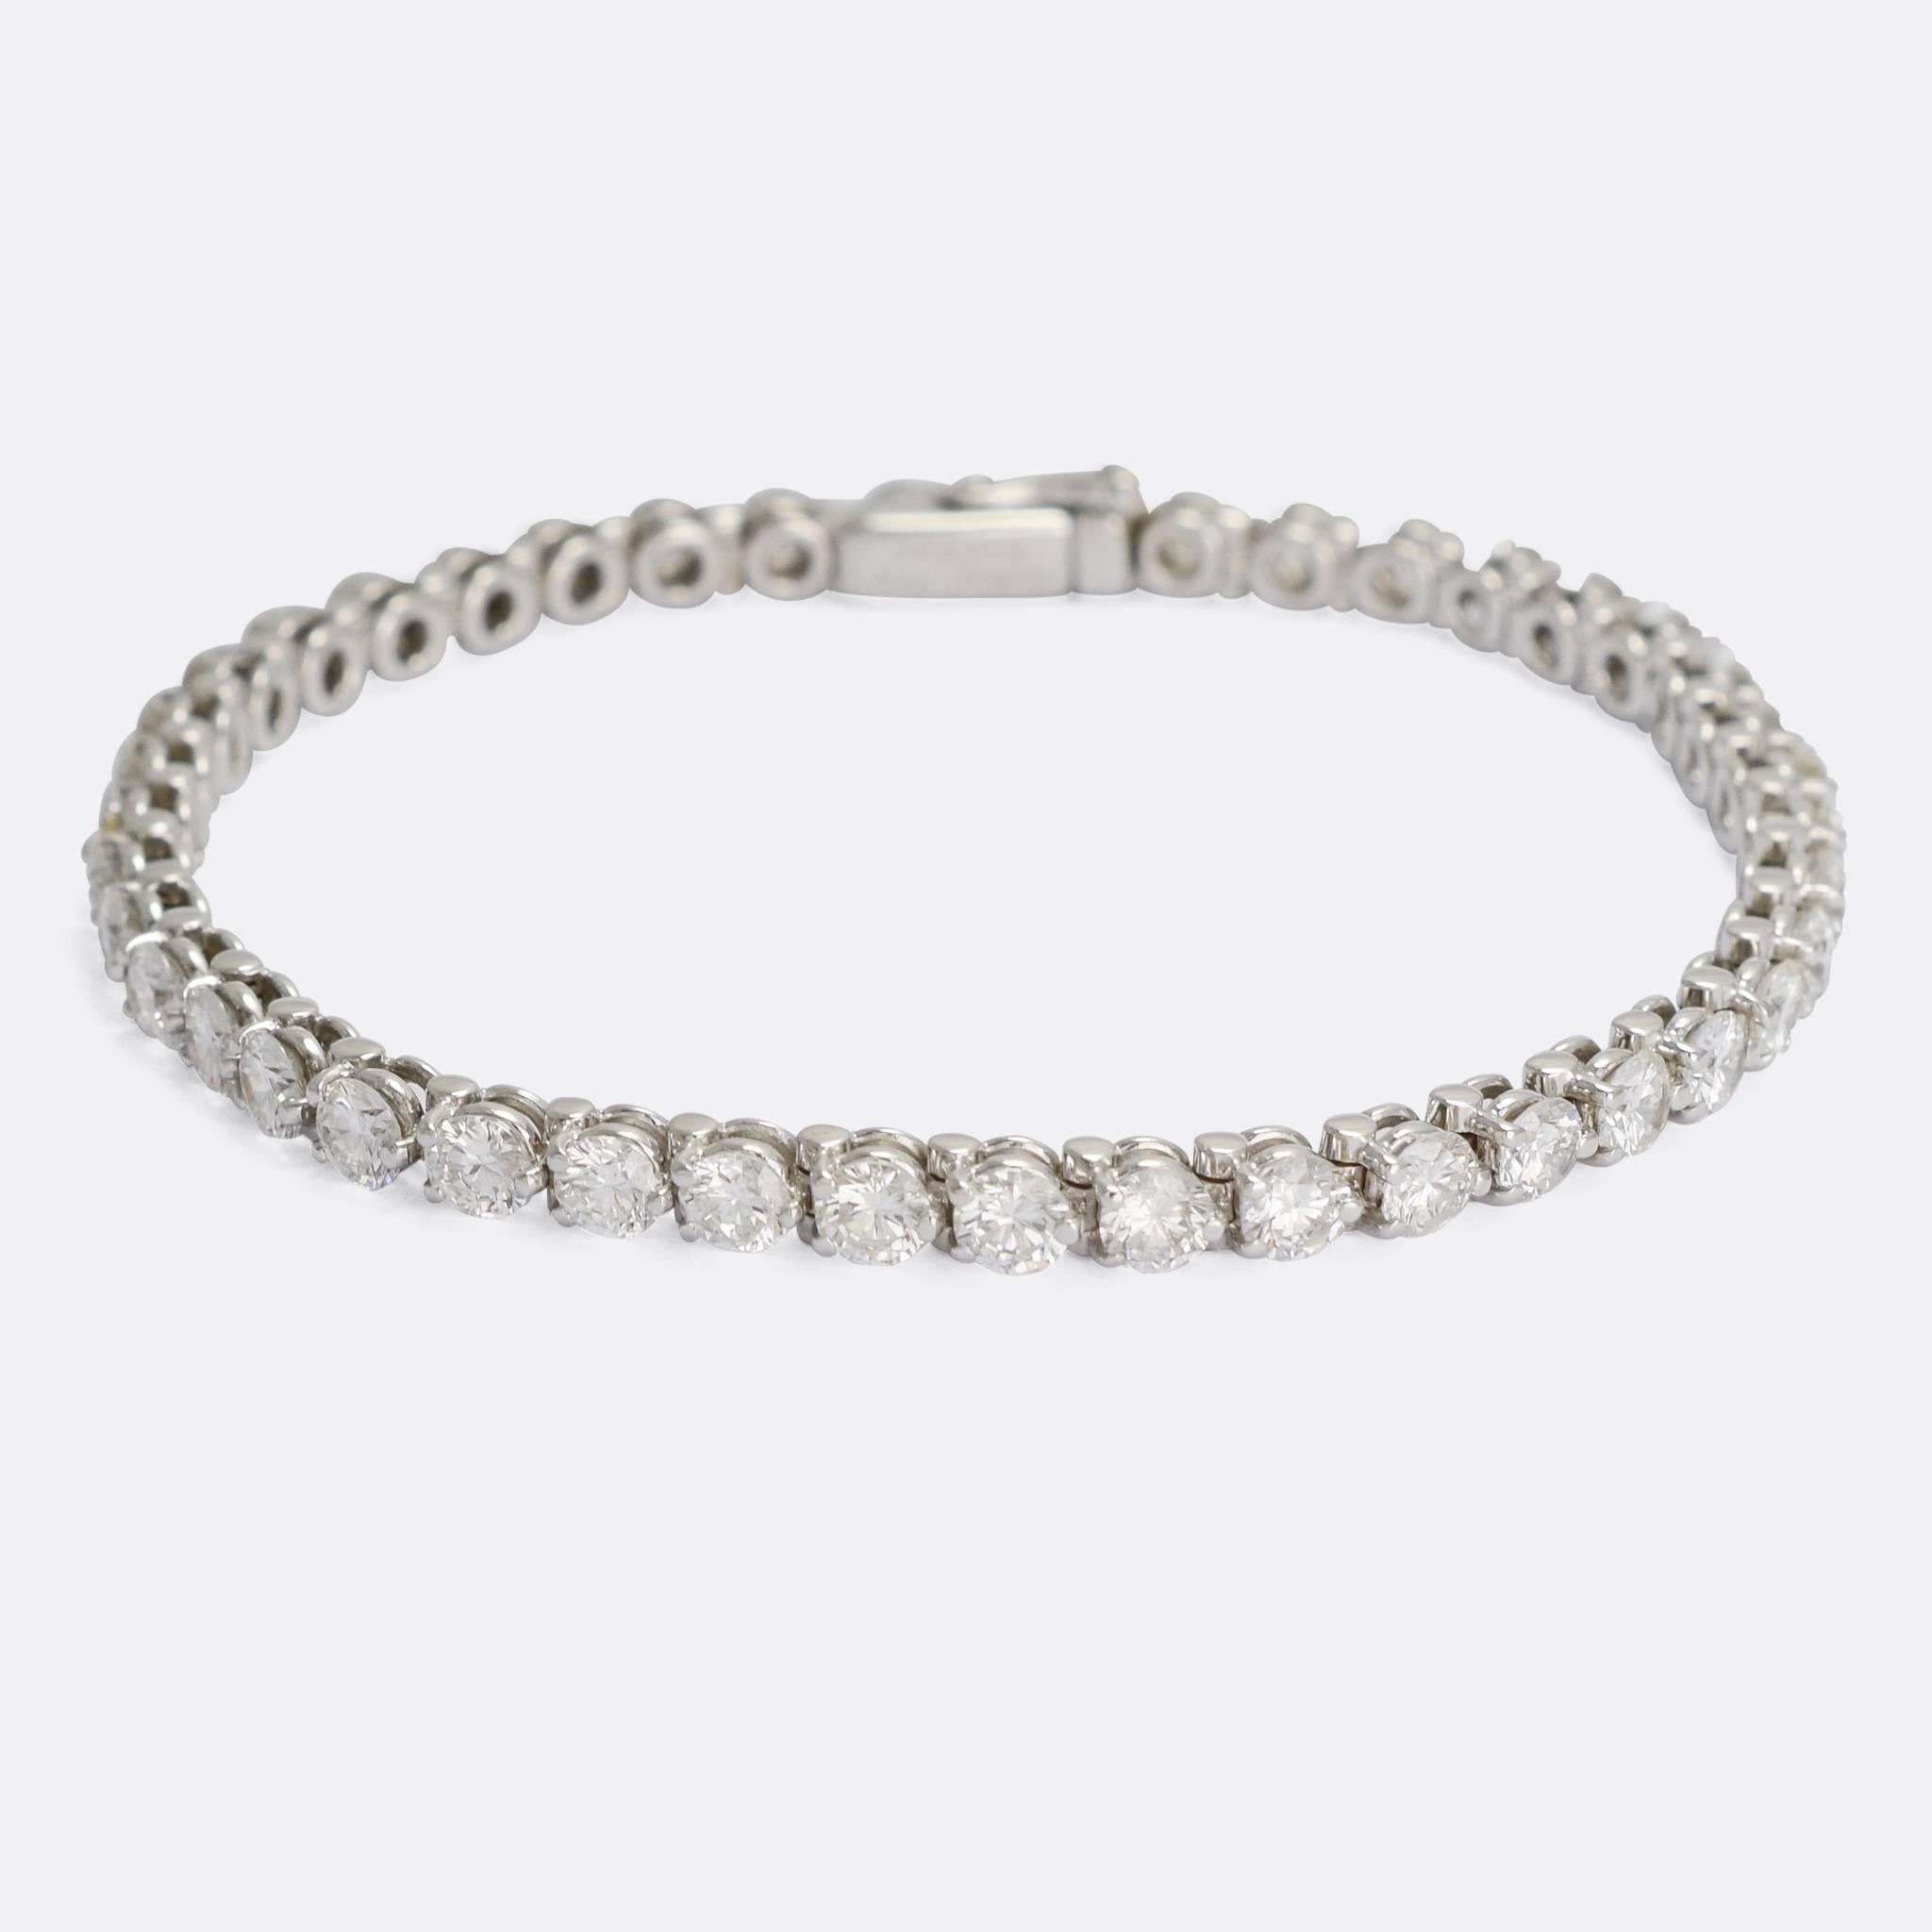 A stunning Cartier tennis bracelet, fully set with 42 brilliant cut diamonds. The stones have a total weight of 6.75 carats, and grade at F/G colour and VS1 clarity. Modelled in 18k gold throughout, the piece features exceptional craftsmanship - as